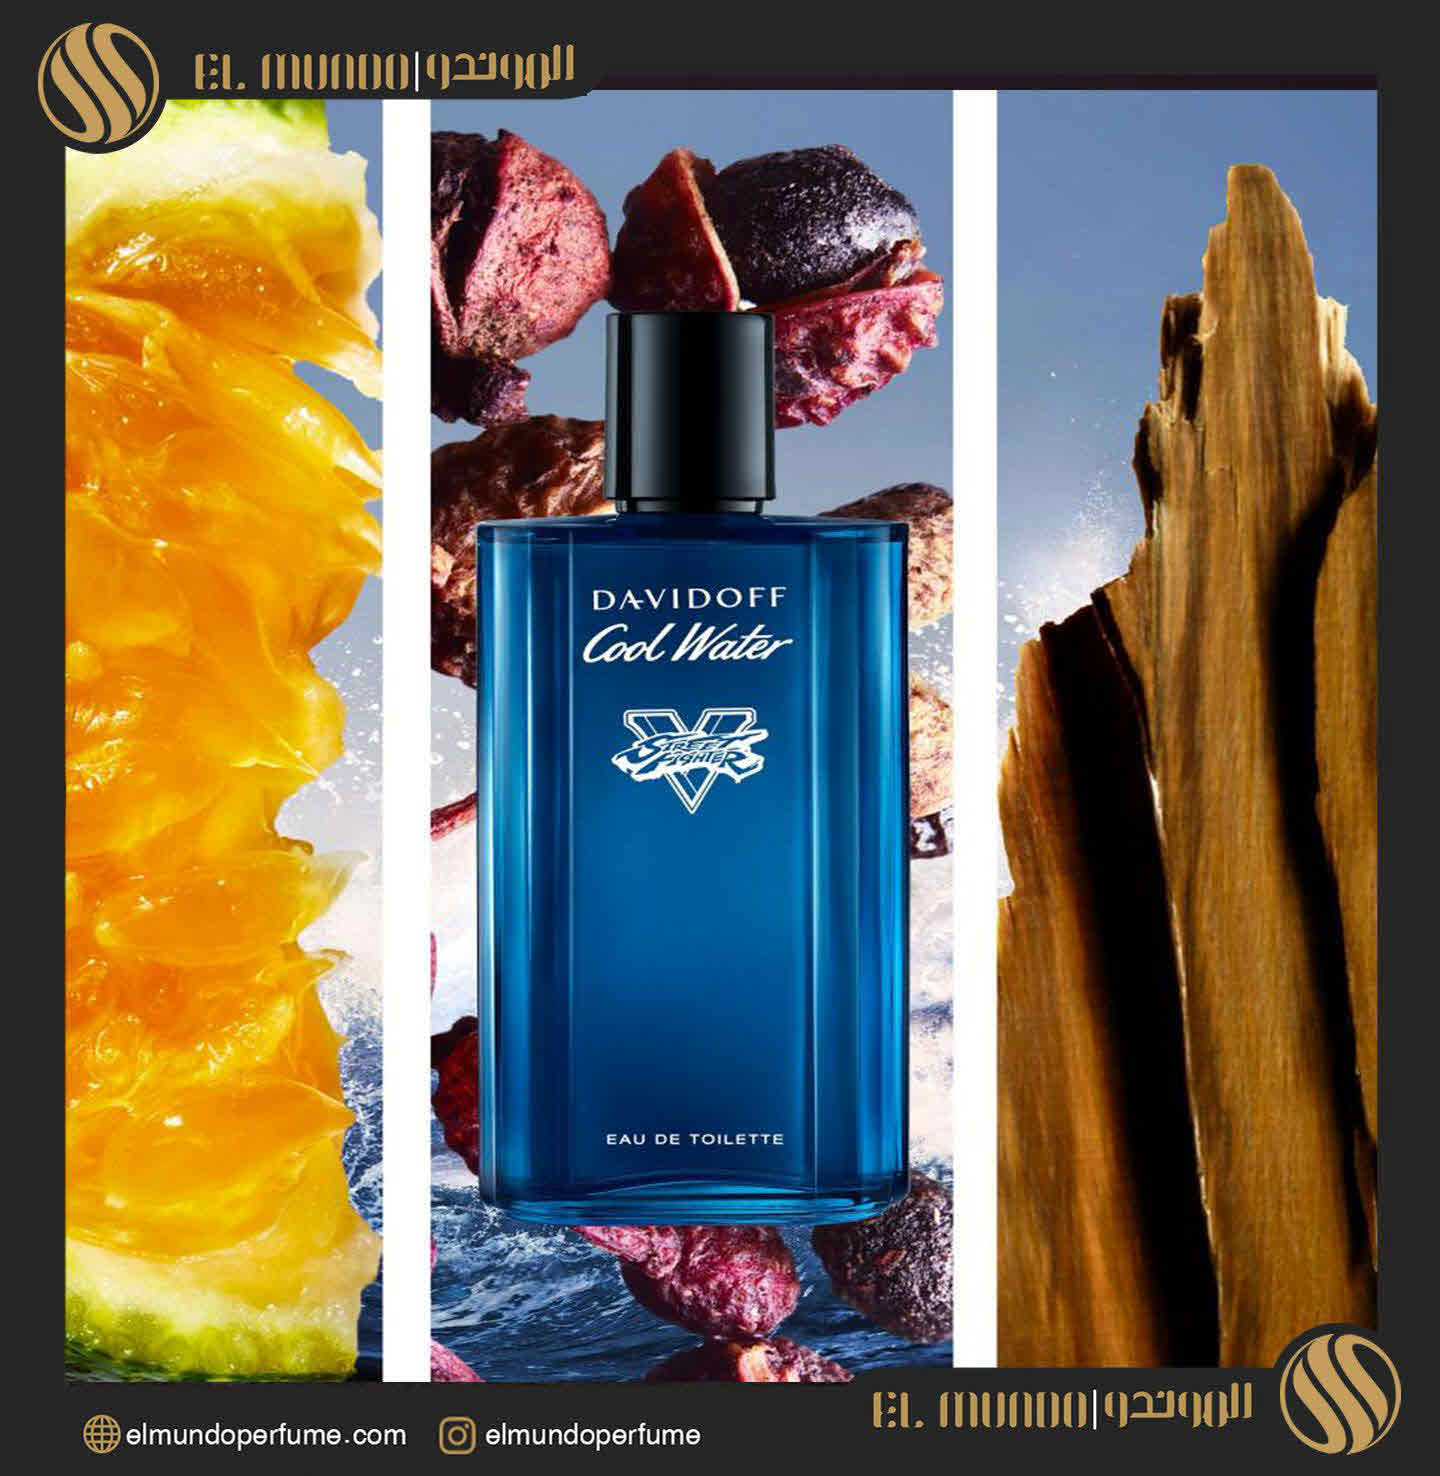 Cool Water Street Fighter Champion Summer Edition For Him Davidoff for men 2 - عطر دیویدوف کول واتر استریت فایتر چمپیون سامر ادیشن